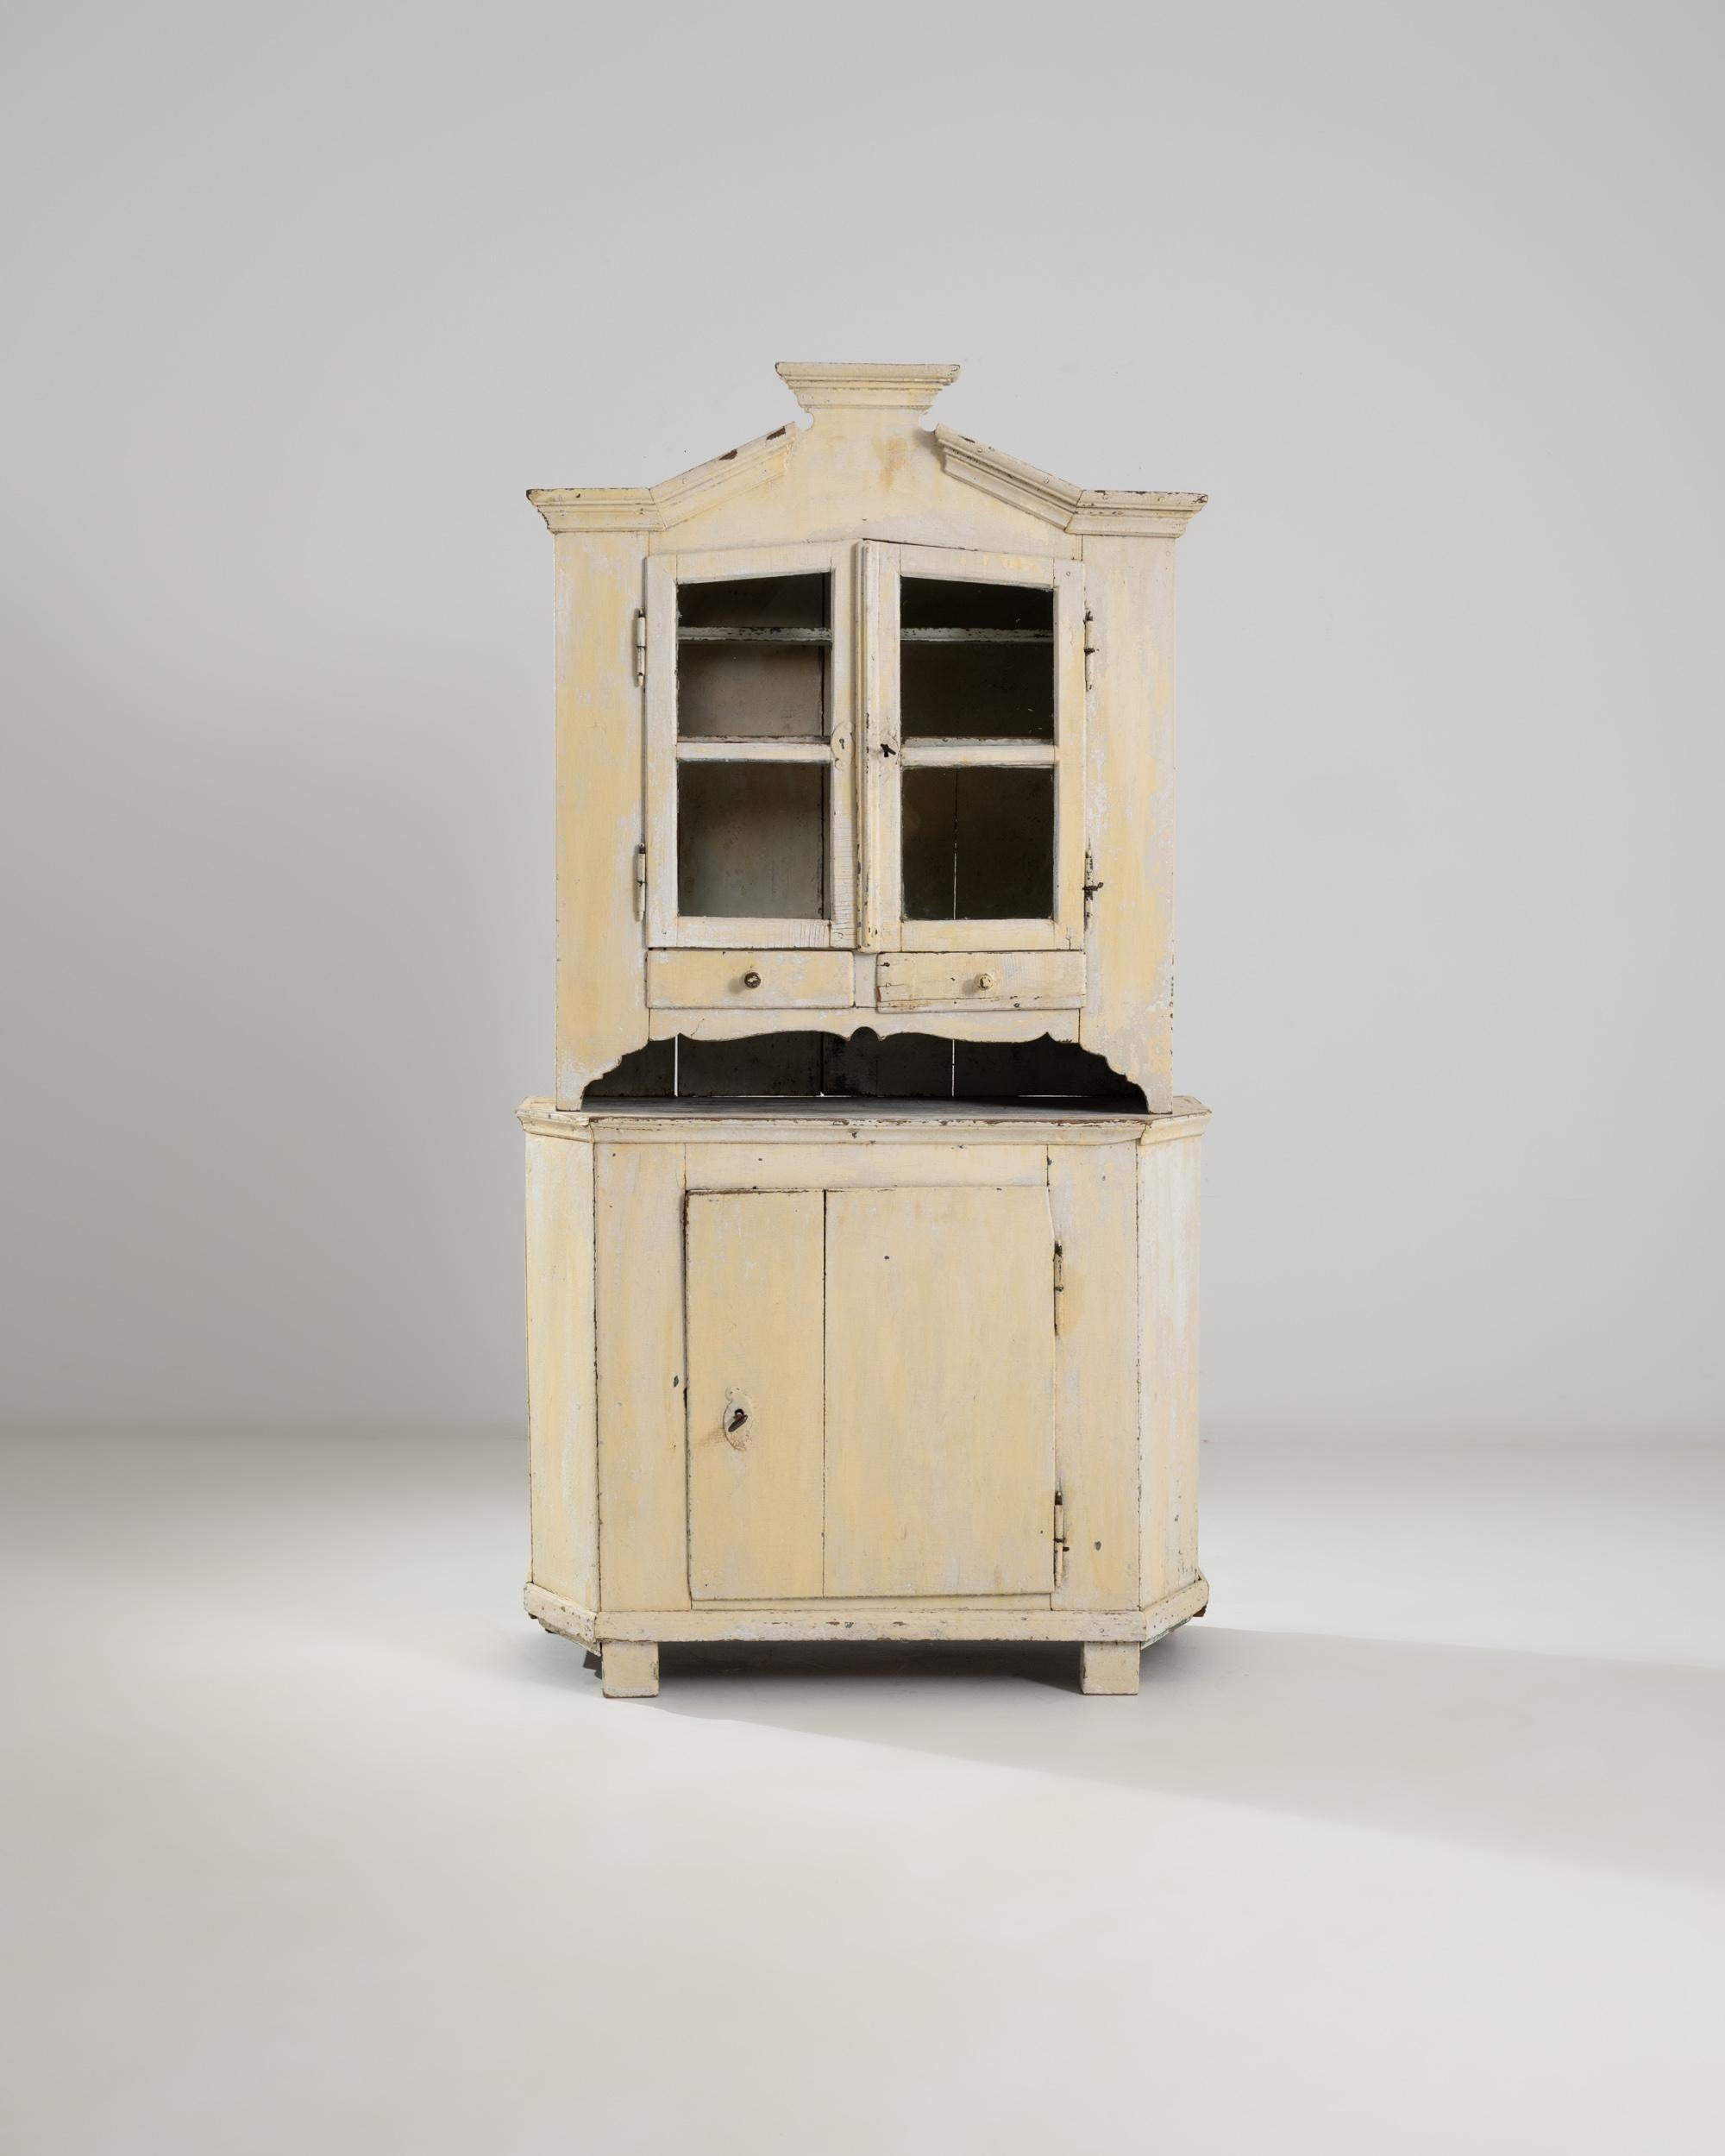 With a warm, butter-yellow patina and a rustic silhouette, this antique Scandinavian farmhouse vitrine radiates a wholesome charm. Built in in the 19th Century, the peaked crown of the cabinet evokes the pointed roofs of traditional Scandinavian